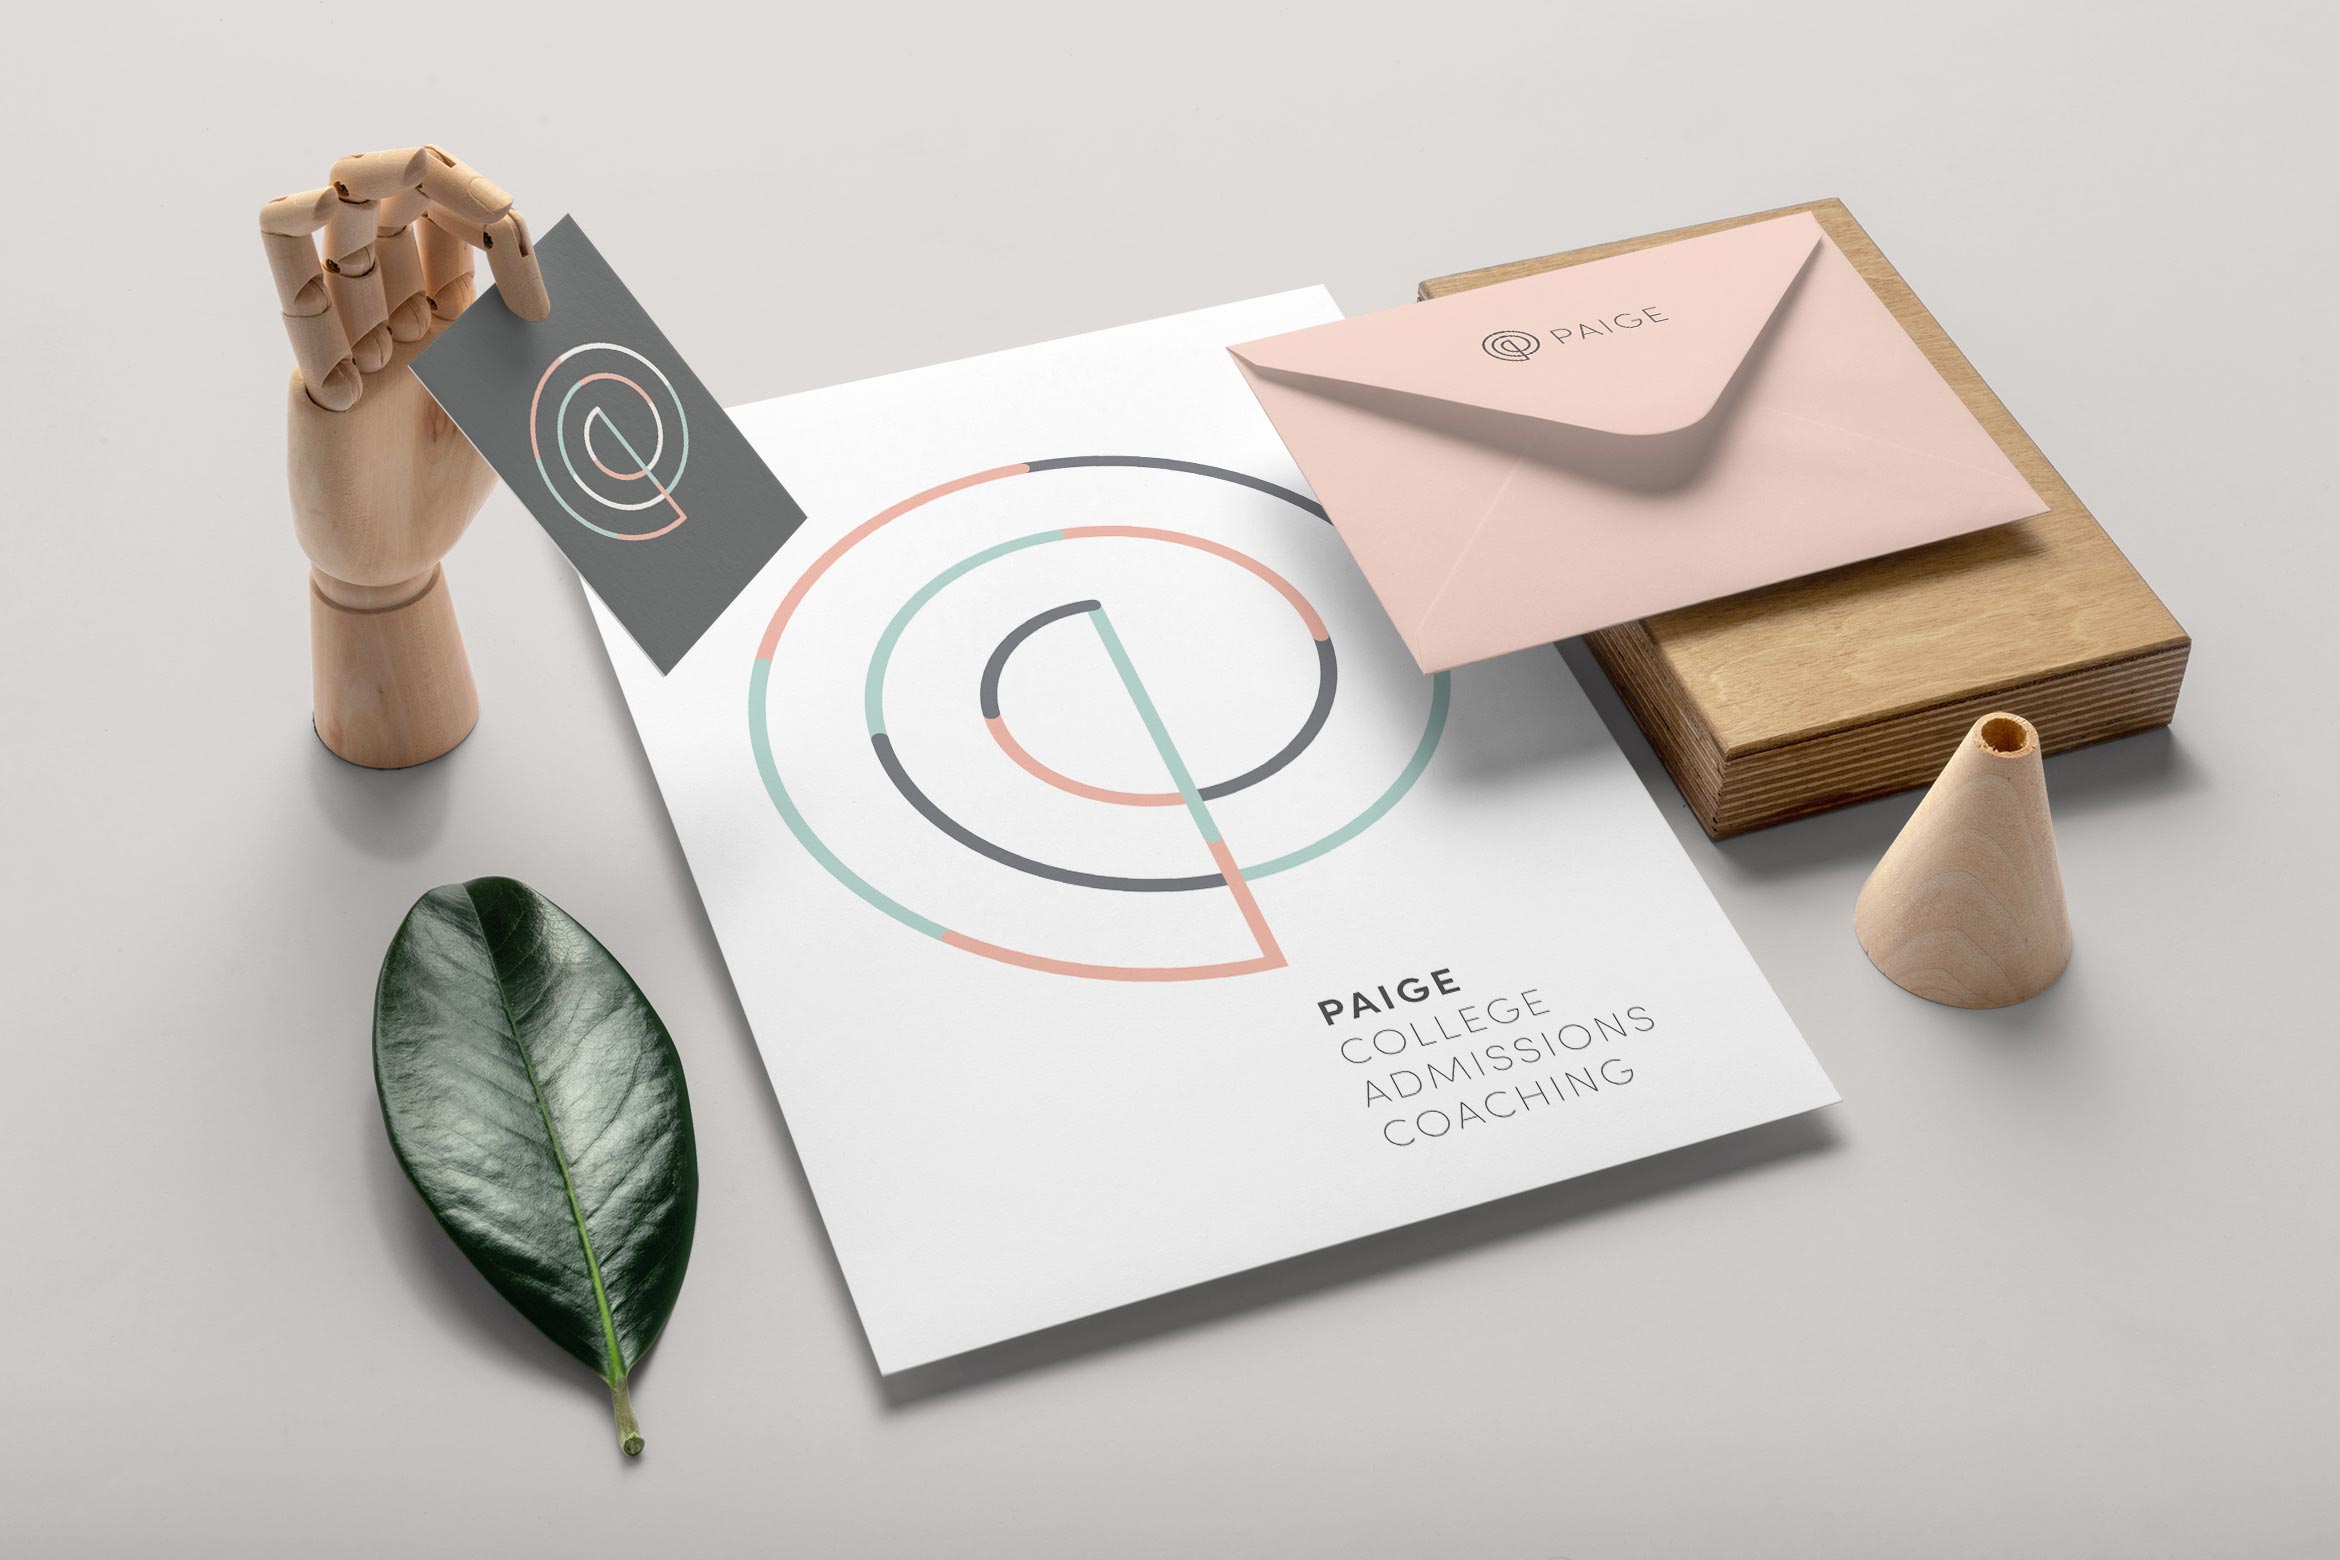 stationery mockup with business card, white folder and peach envelopes